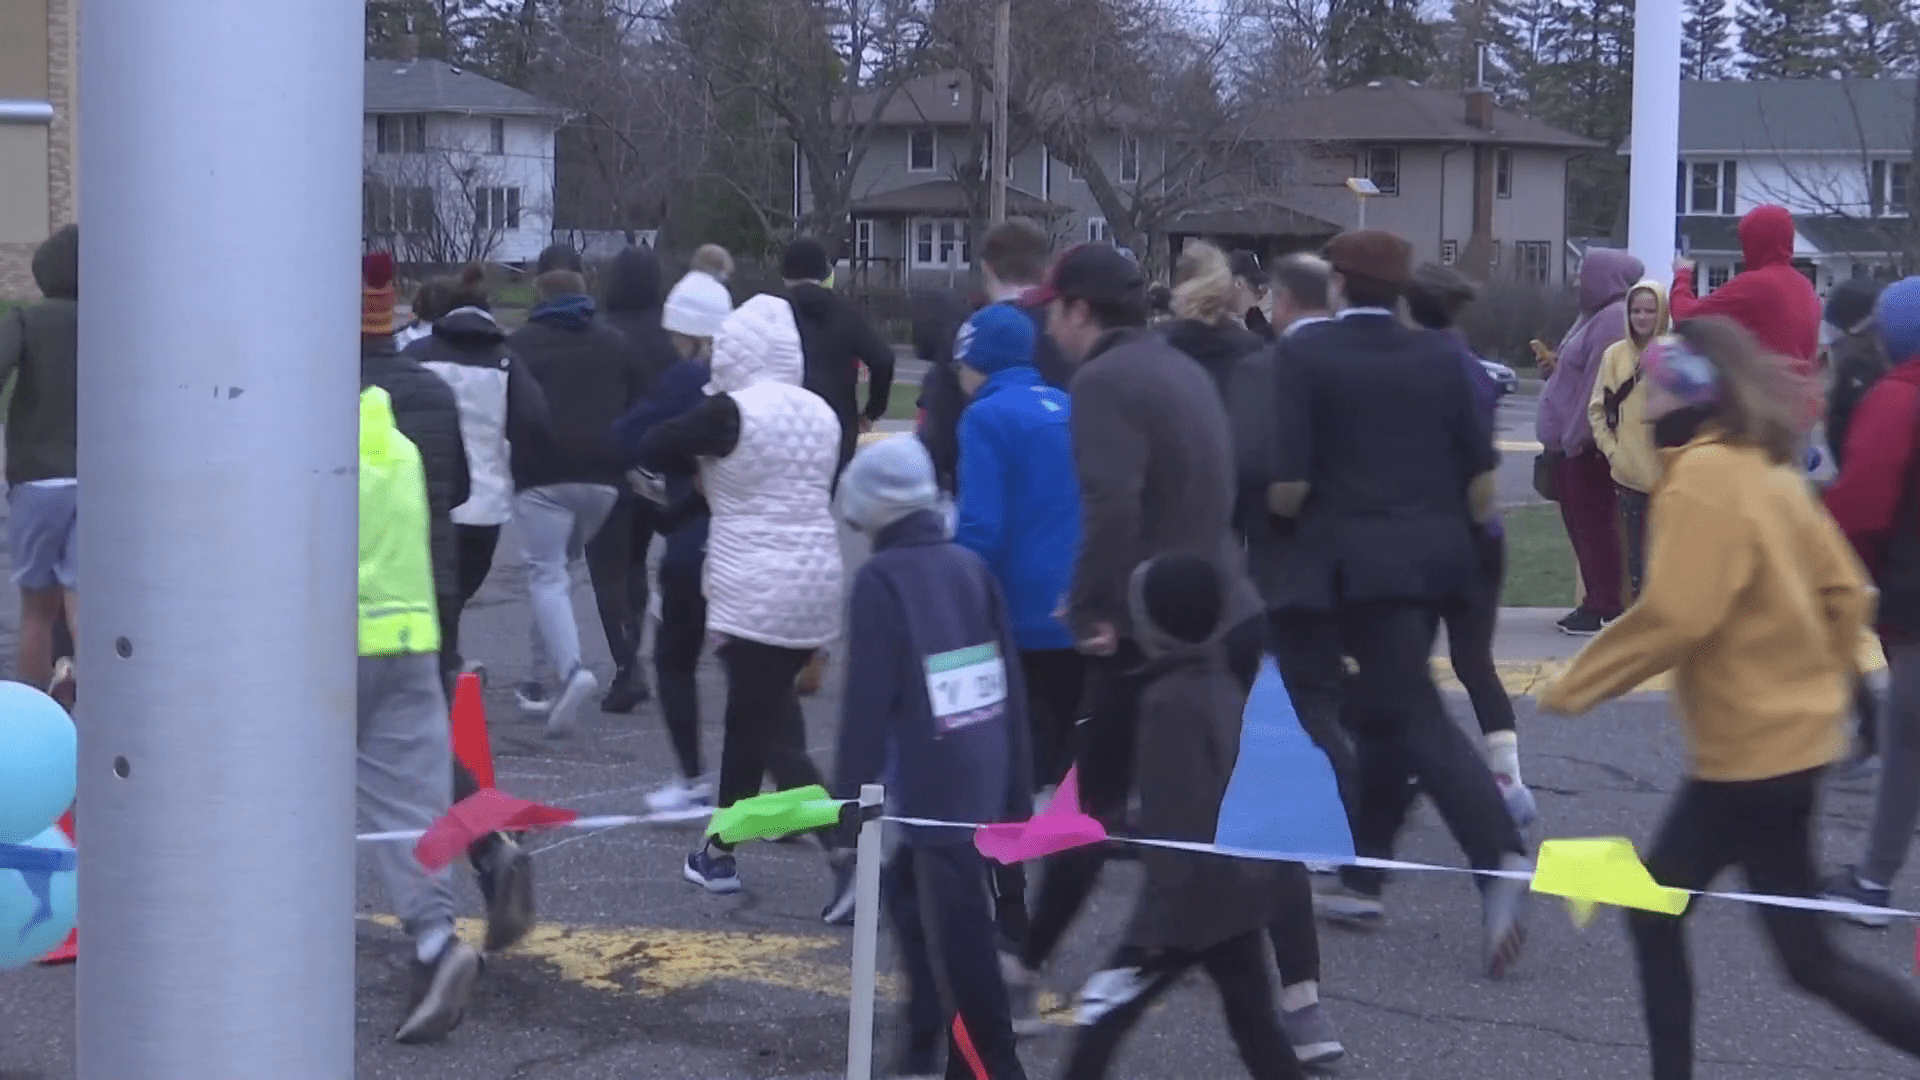 Justice North’s Law Day 5K bringing legal aid to people in need